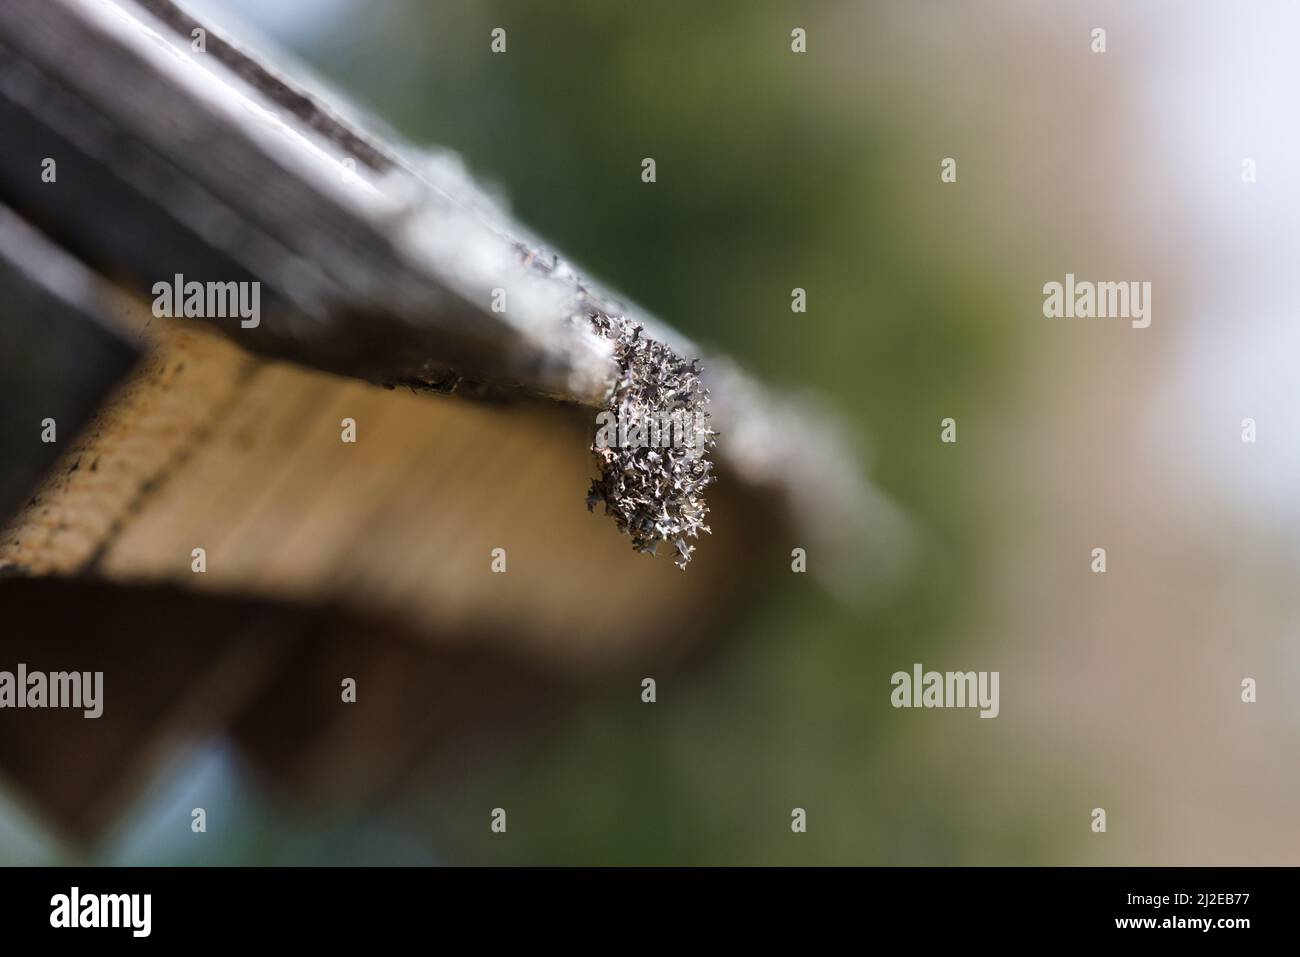 Depth of field study focused on Icelandic moss growing on an old log cabin. Stock Photo